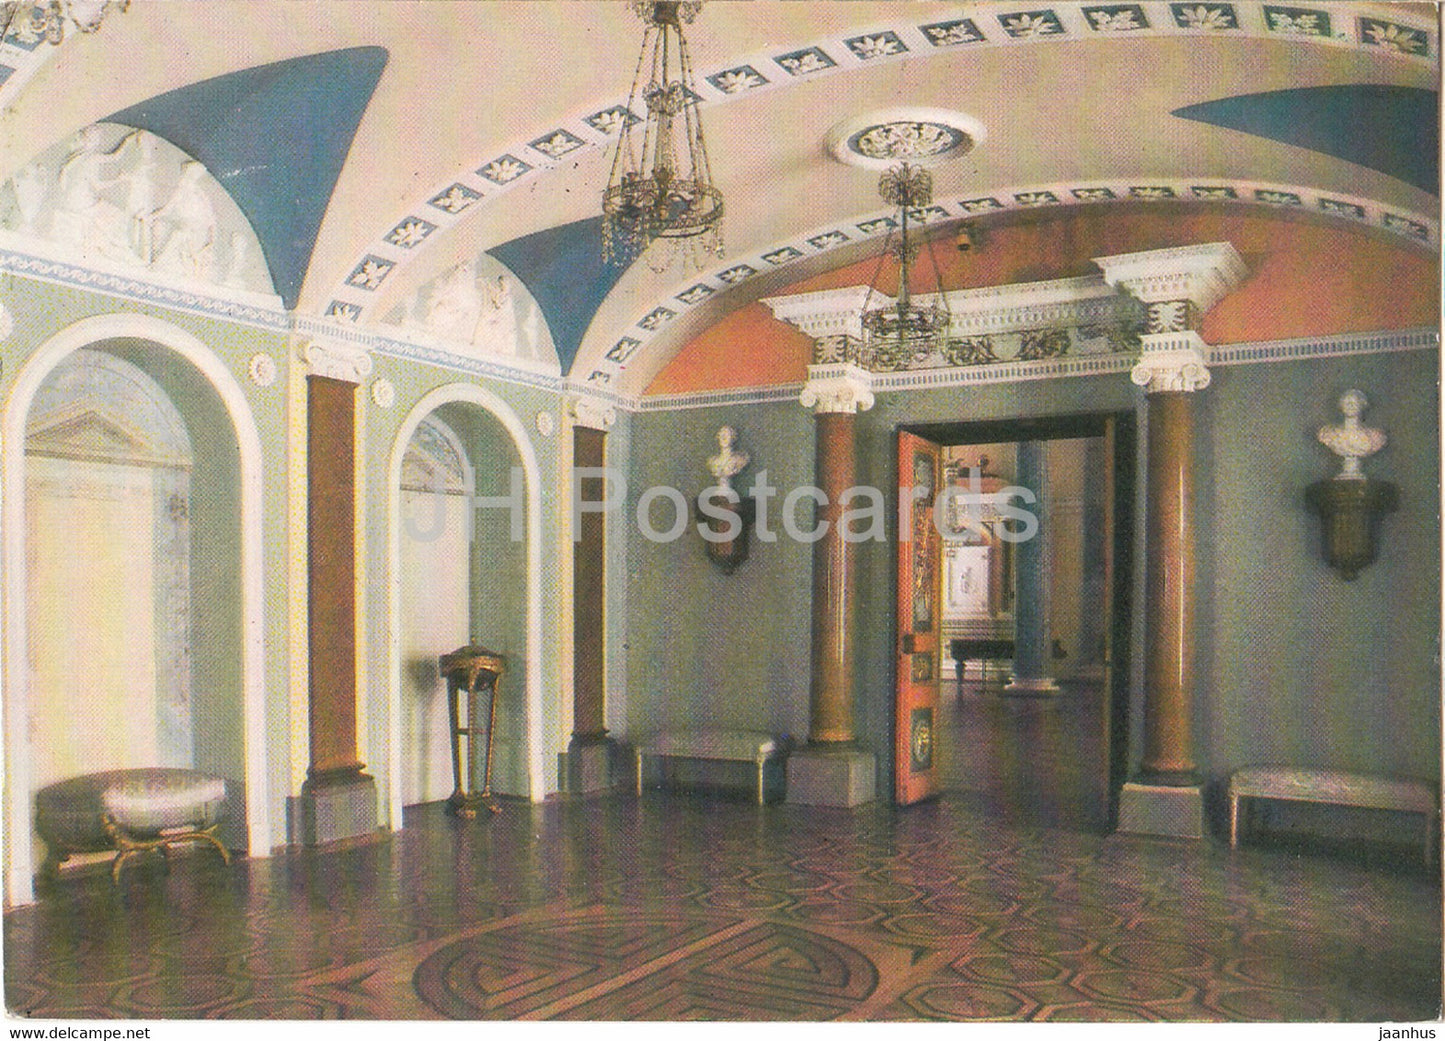 Moscow - Ostankino Palace - Walk-through gallery to the Egyptian pavilion - 1985 - Russia USSR - used - JH Postcards